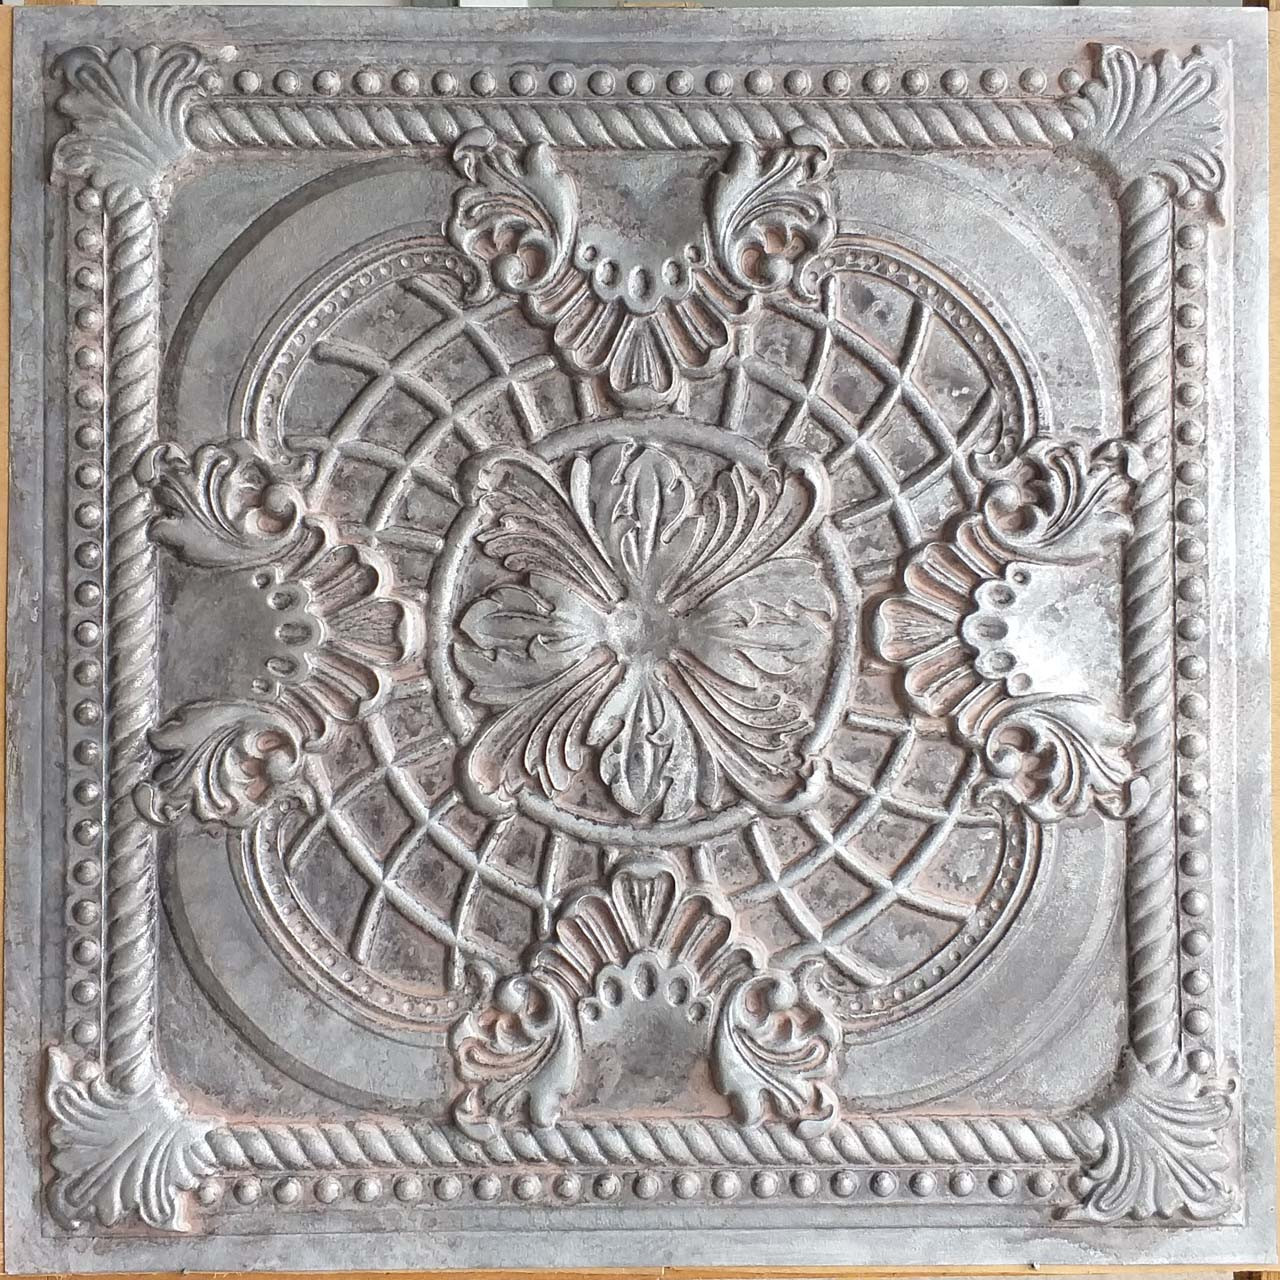 Faux Tin Ceiling Tile - 24 in x 24 in - #DCT 31